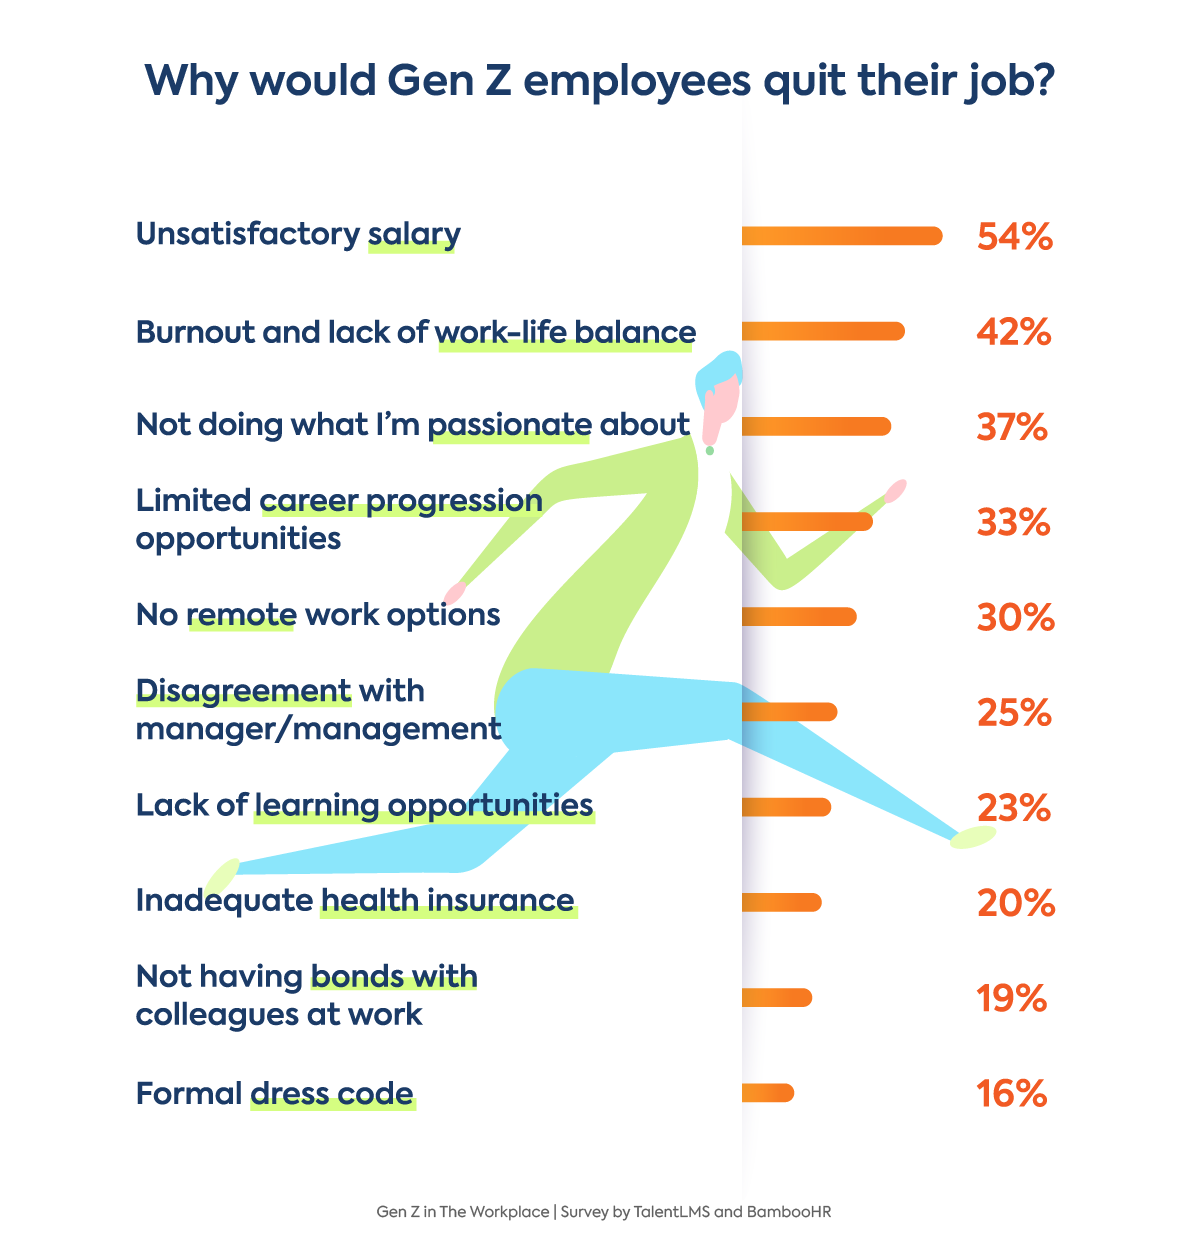 Ge Z at work statistics: Reasons for Gen Zers to quit their job